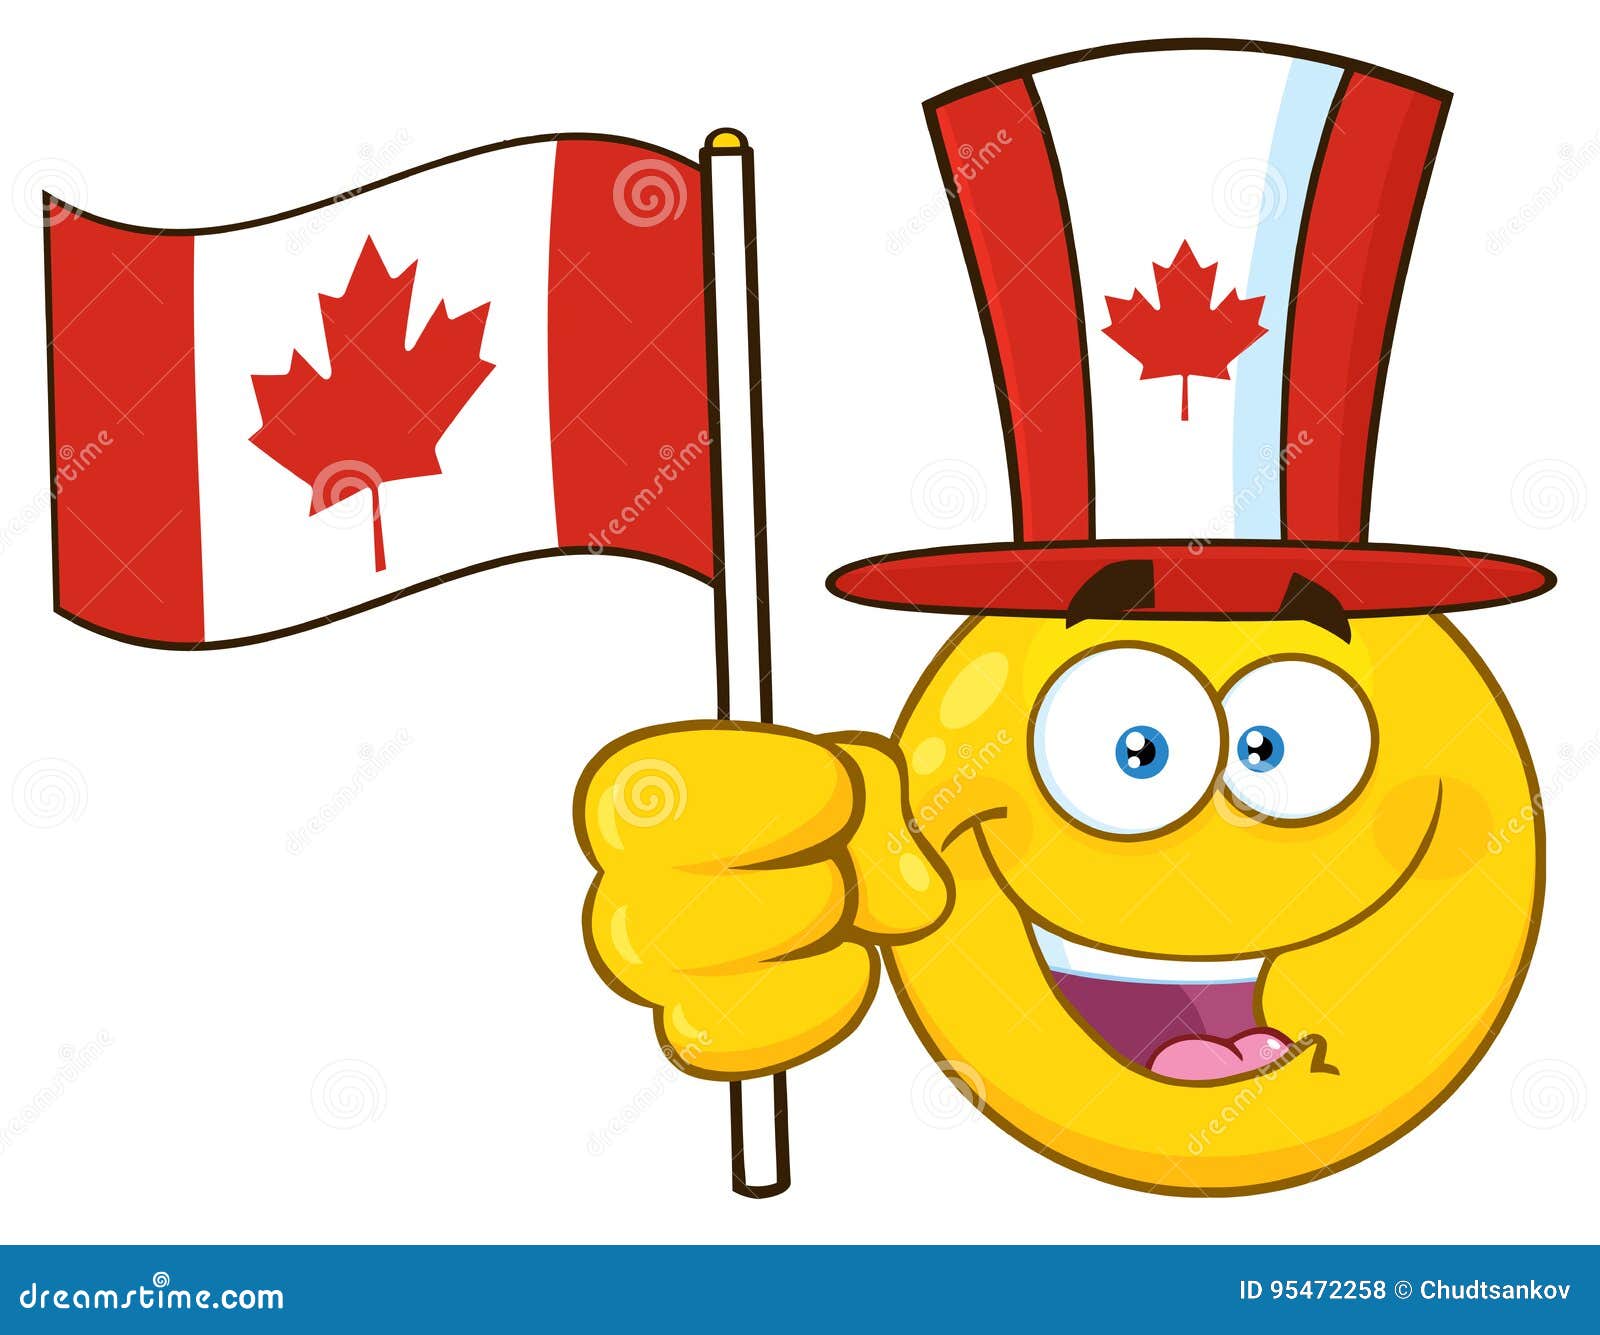 Patriotic Yellow Cartoon Emoji Face Character Wearing a Maple Leaf Top Hat  Waving Canadian Flag Stock Vector - Illustration of circle, canada: 95472258